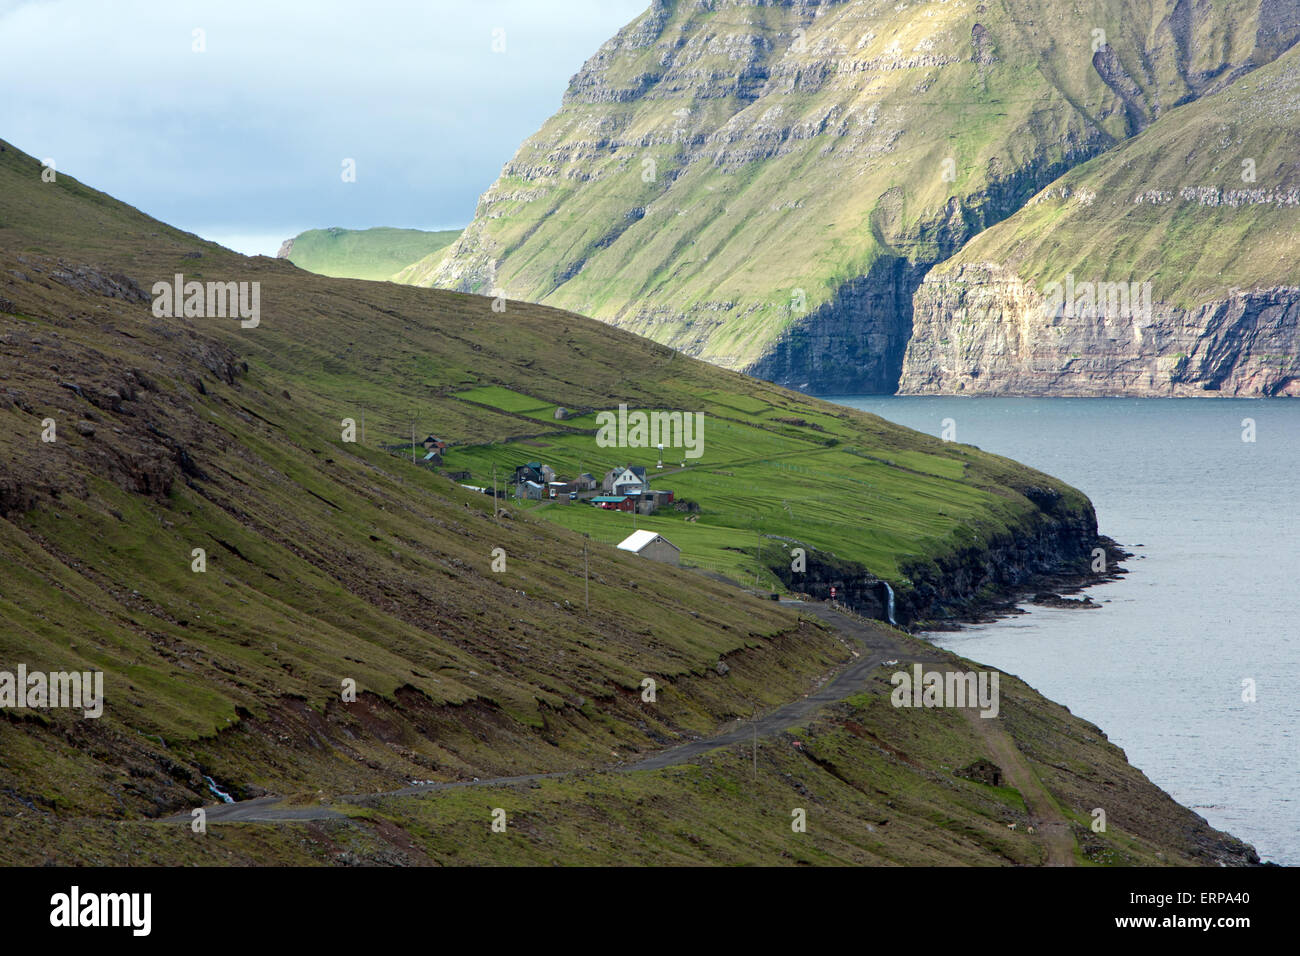 Faroe Islands, Fjord surrounded by green mountains Stock Photo